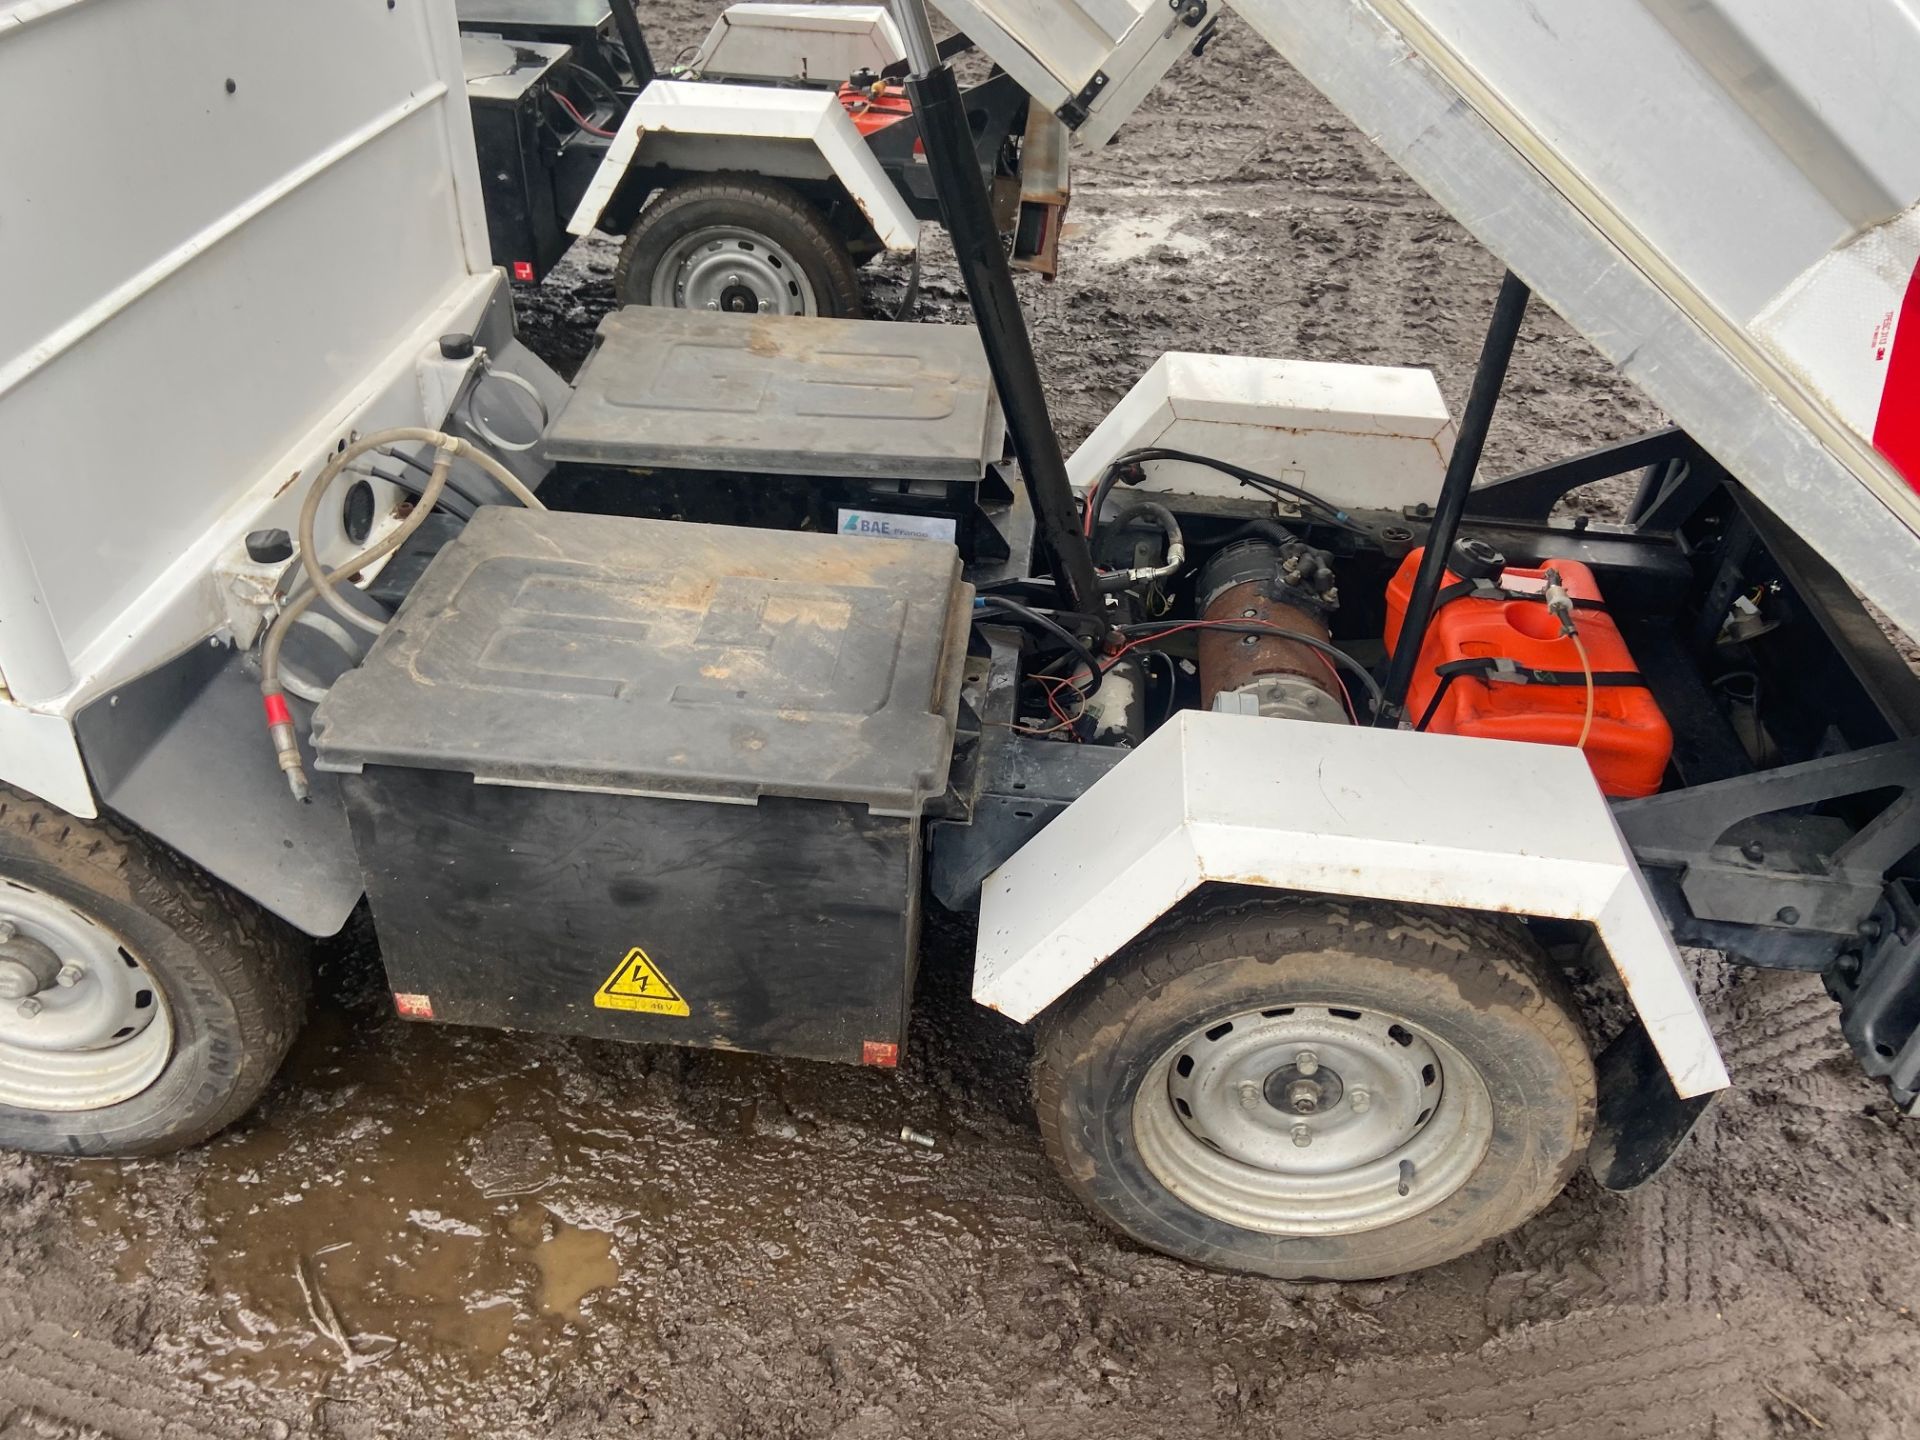 2 X GROUPIL G3 ELECTRIC TIPPER TRUCKS FOR SPARES / REPAIRS. FRENCH REGISTERED *PLUS VAT* - Image 6 of 7